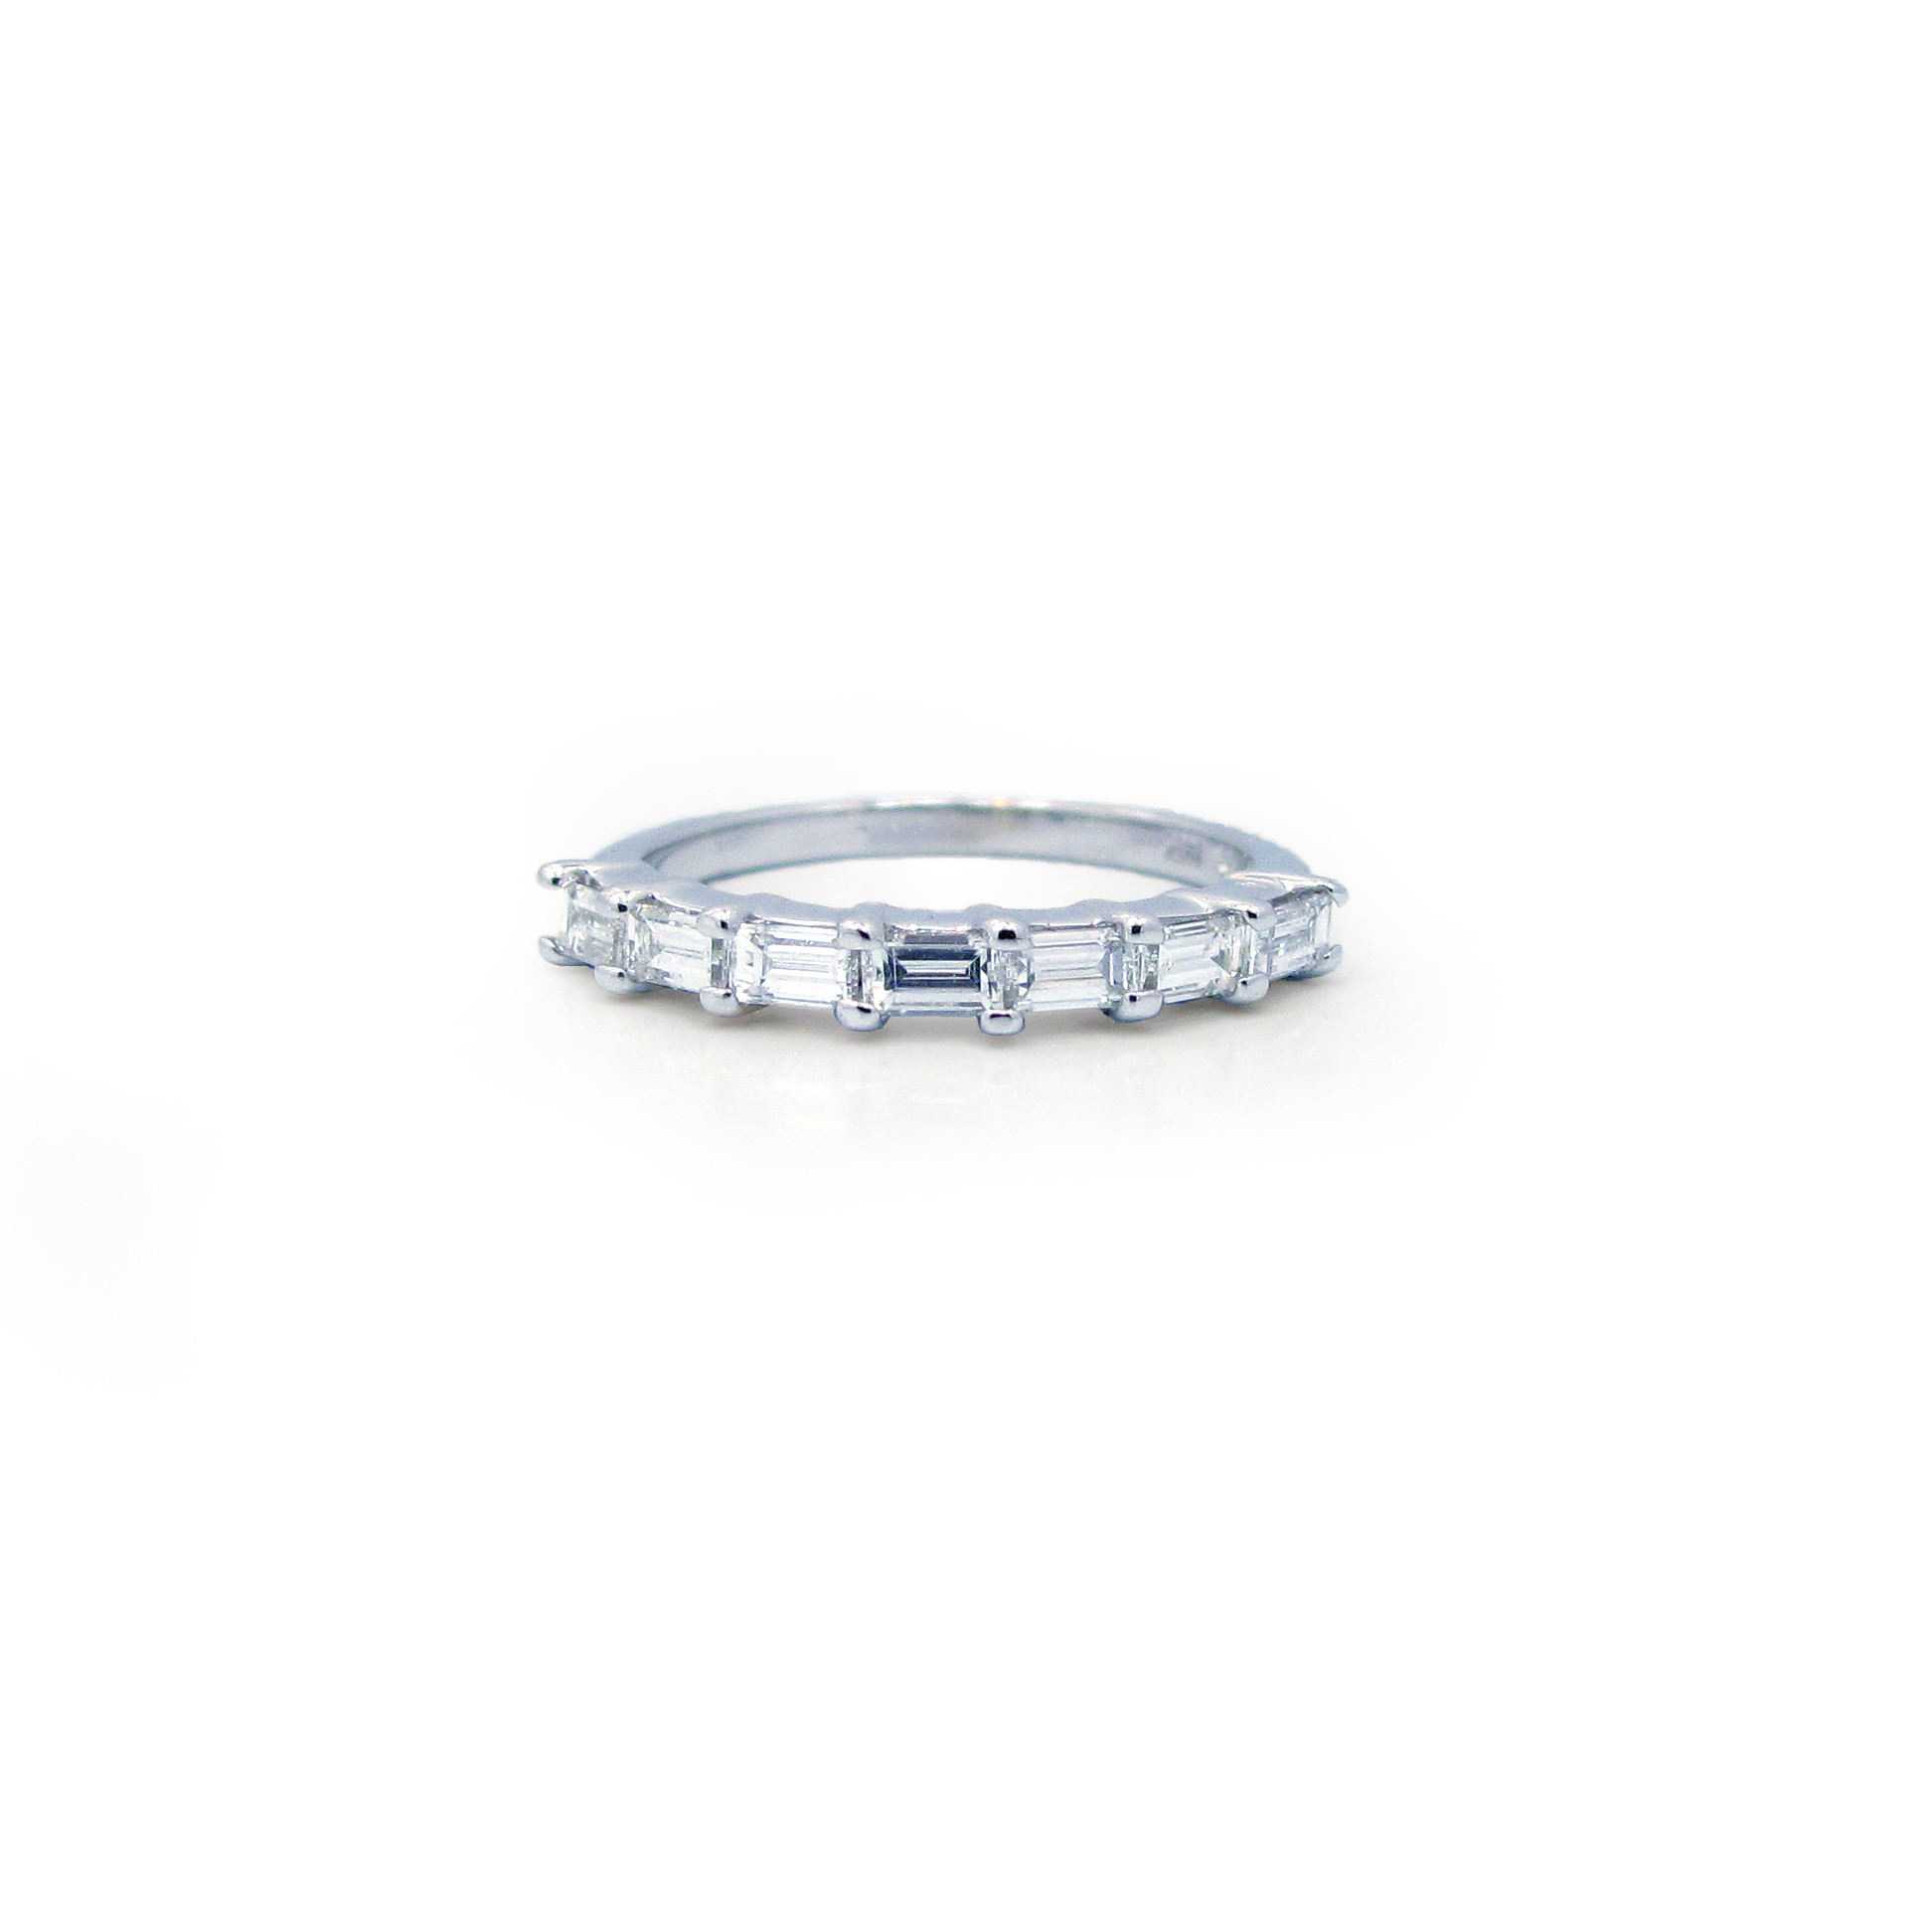 This is a picture of a Horizontal Baguette Diamond Eternity Band